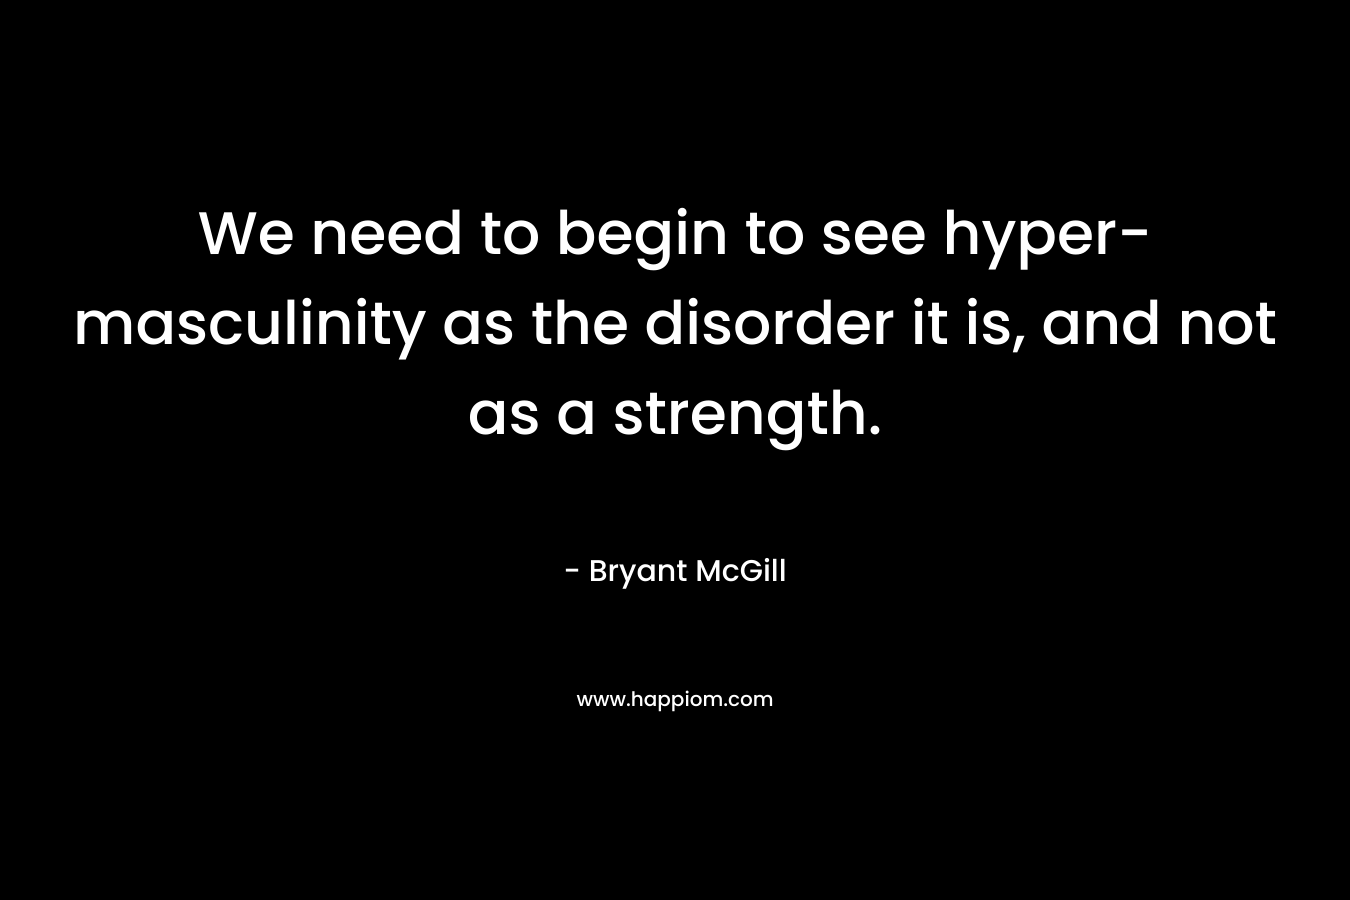 We need to begin to see hyper-masculinity as the disorder it is, and not as a strength.